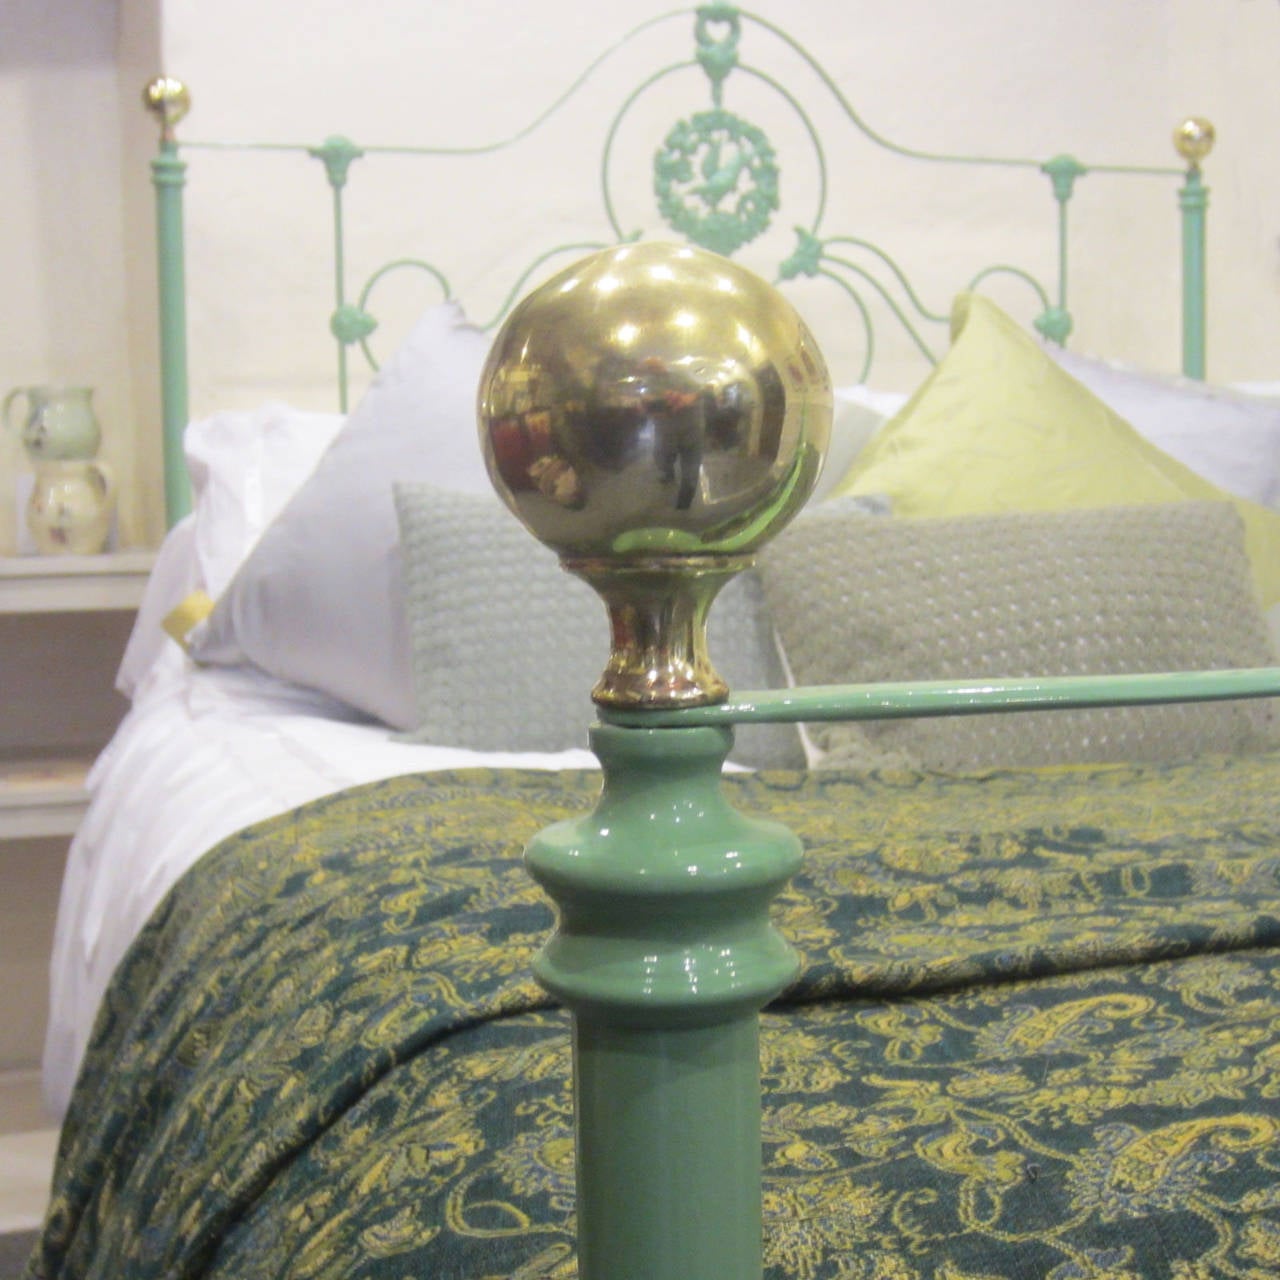 brass bed with porcelain knobs